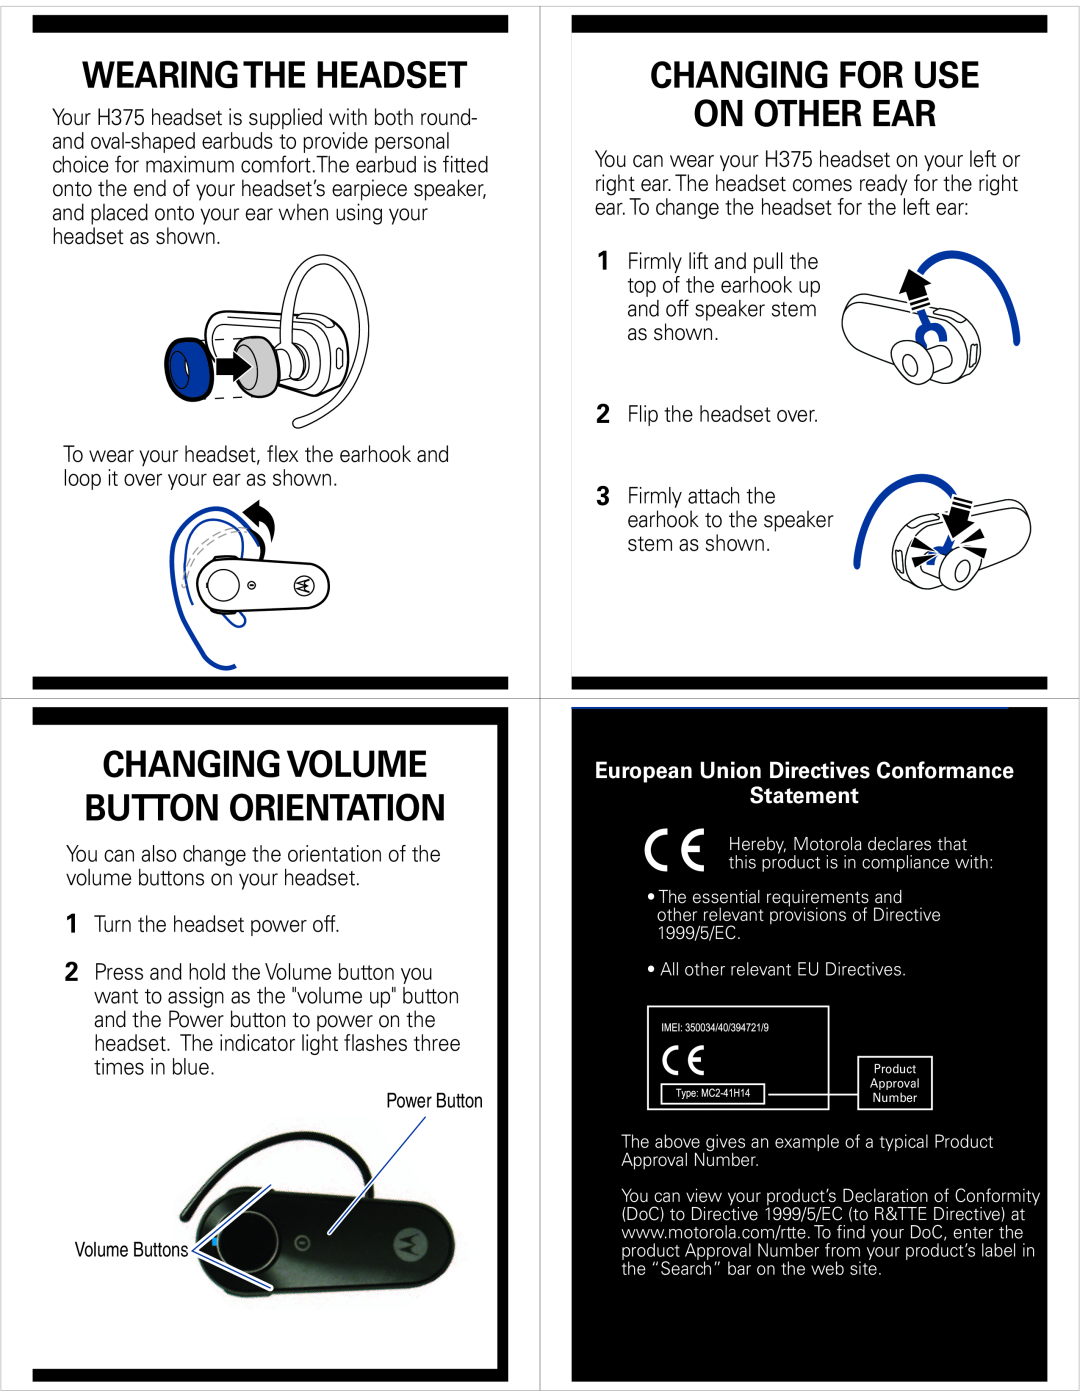 Motorola H375 quick start Wearing The Headset, Changing For Use, On Other Ear, Changing Volume, Button Orientation 